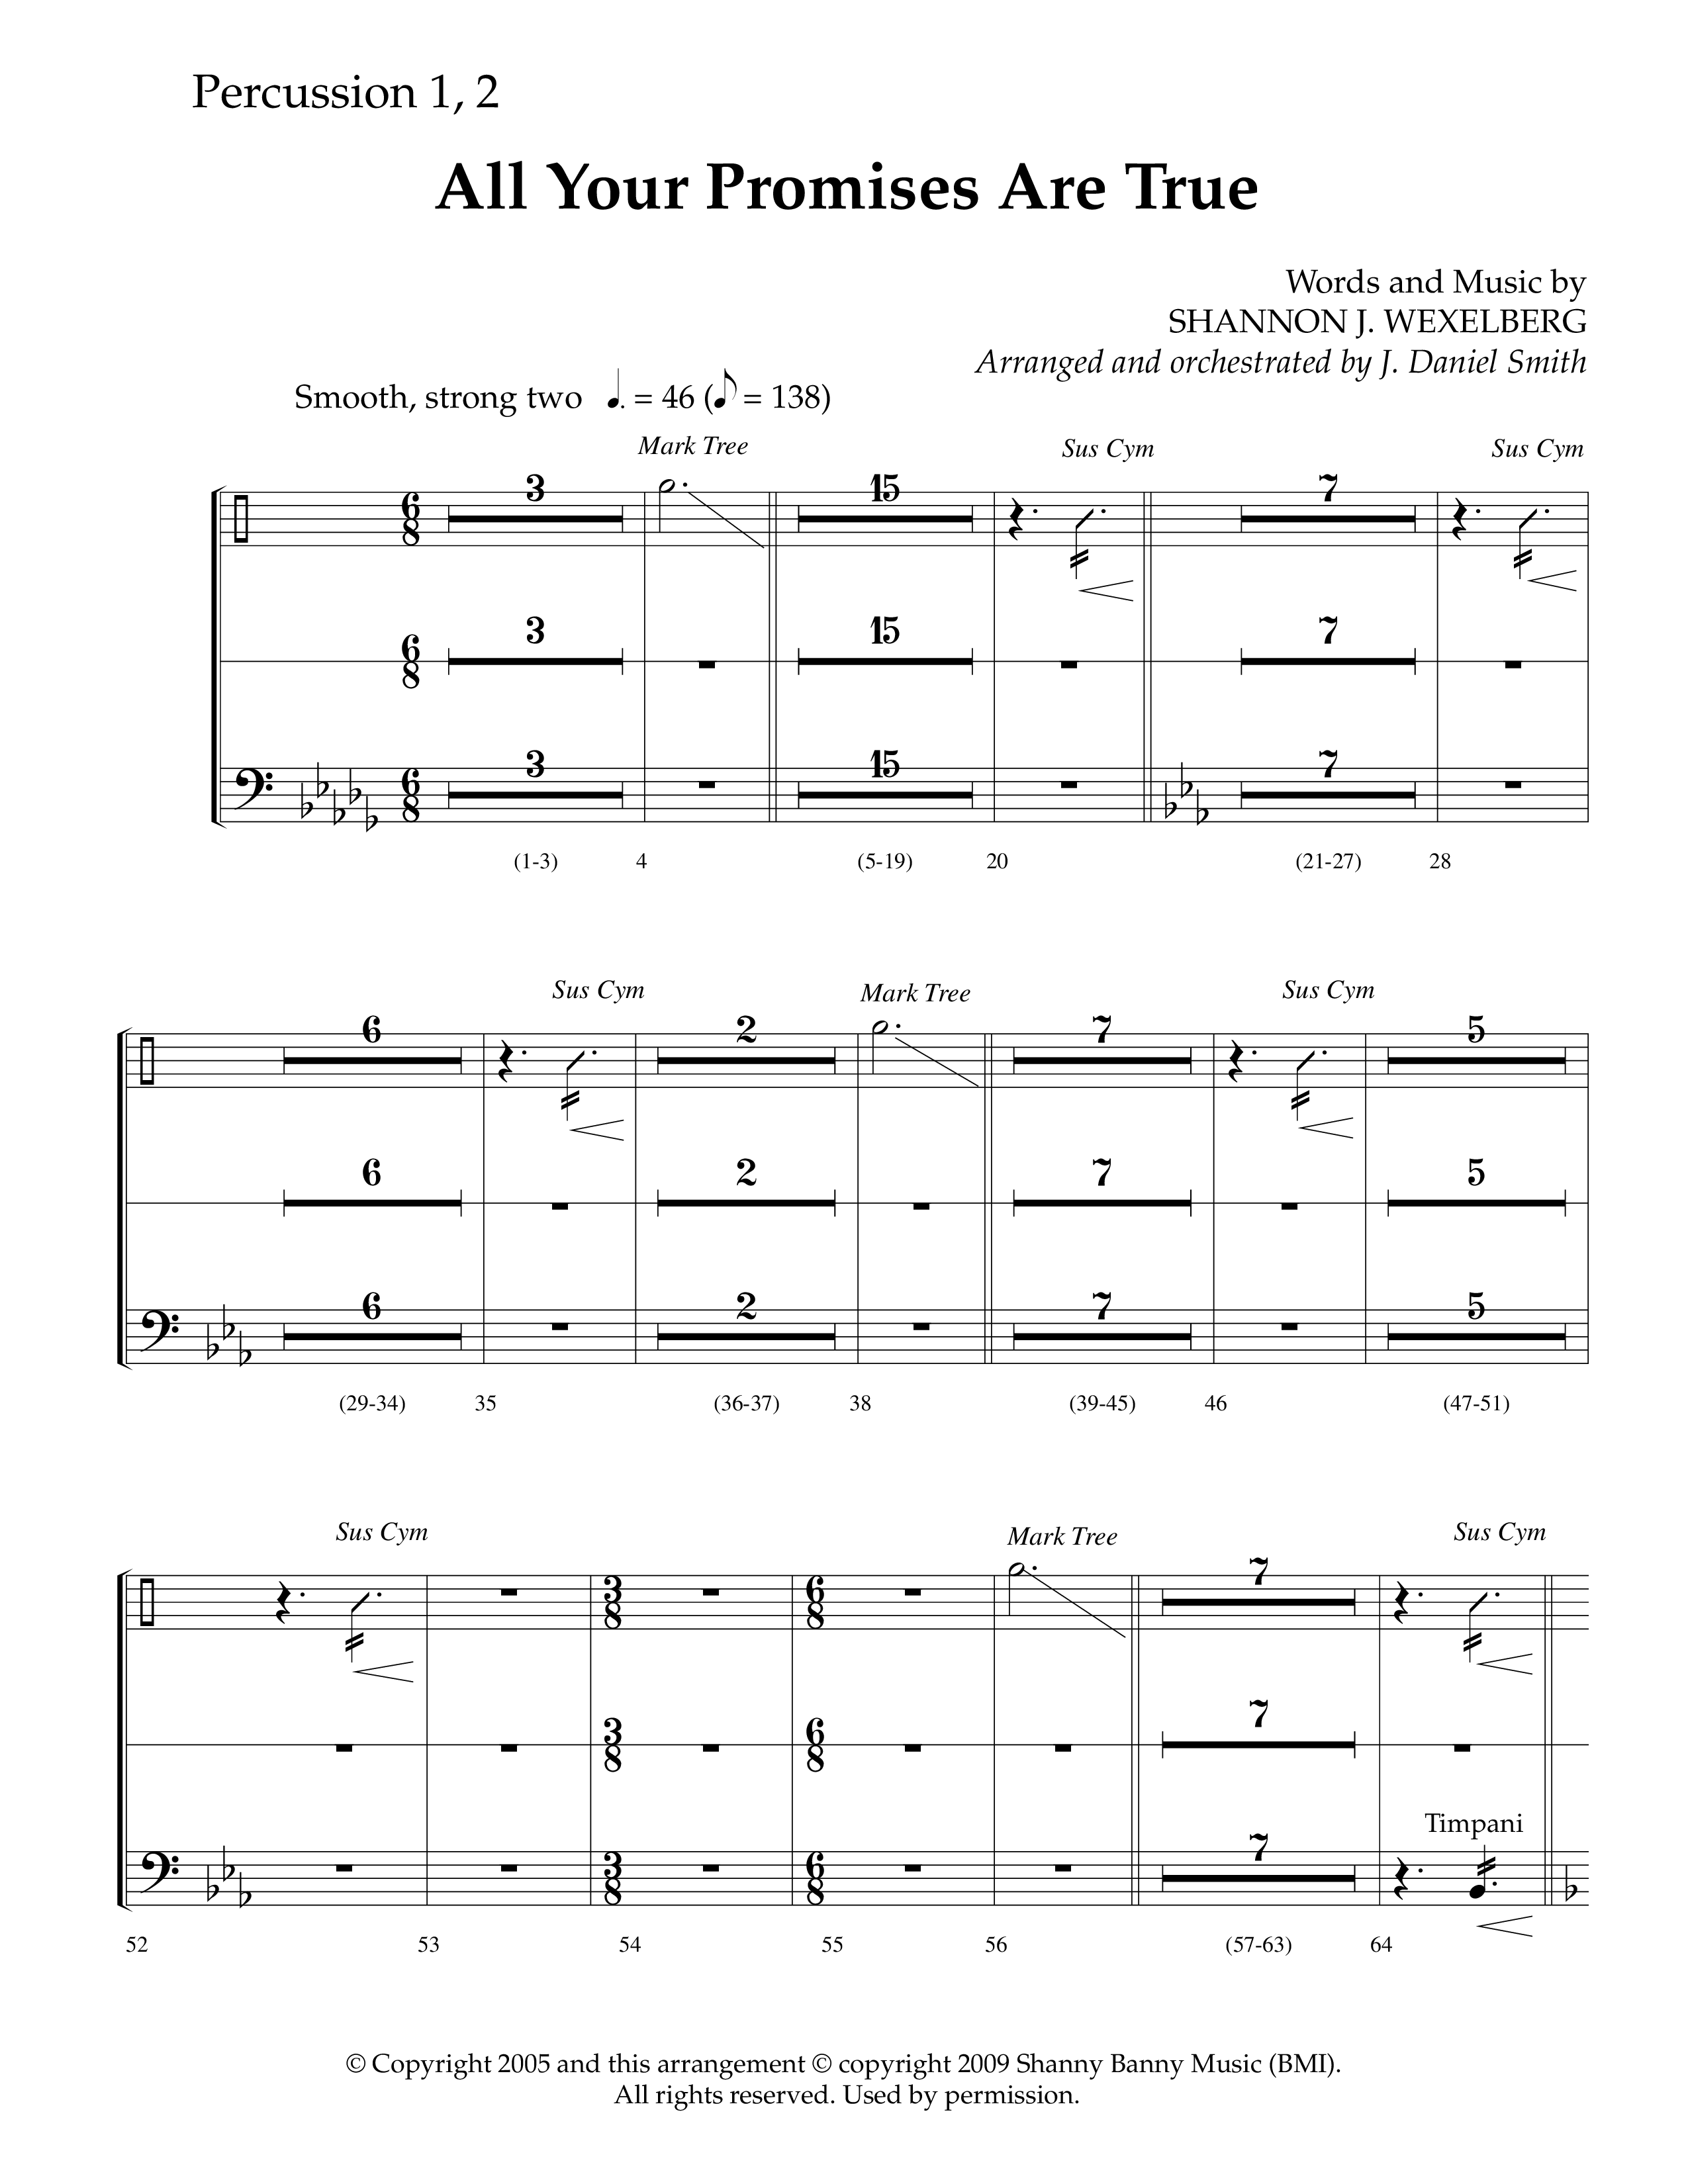 All Your Promises Are True (Choral Anthem SATB) Percussion 1/2 (Lifeway Choral / Arr. J. Daniel Smith)